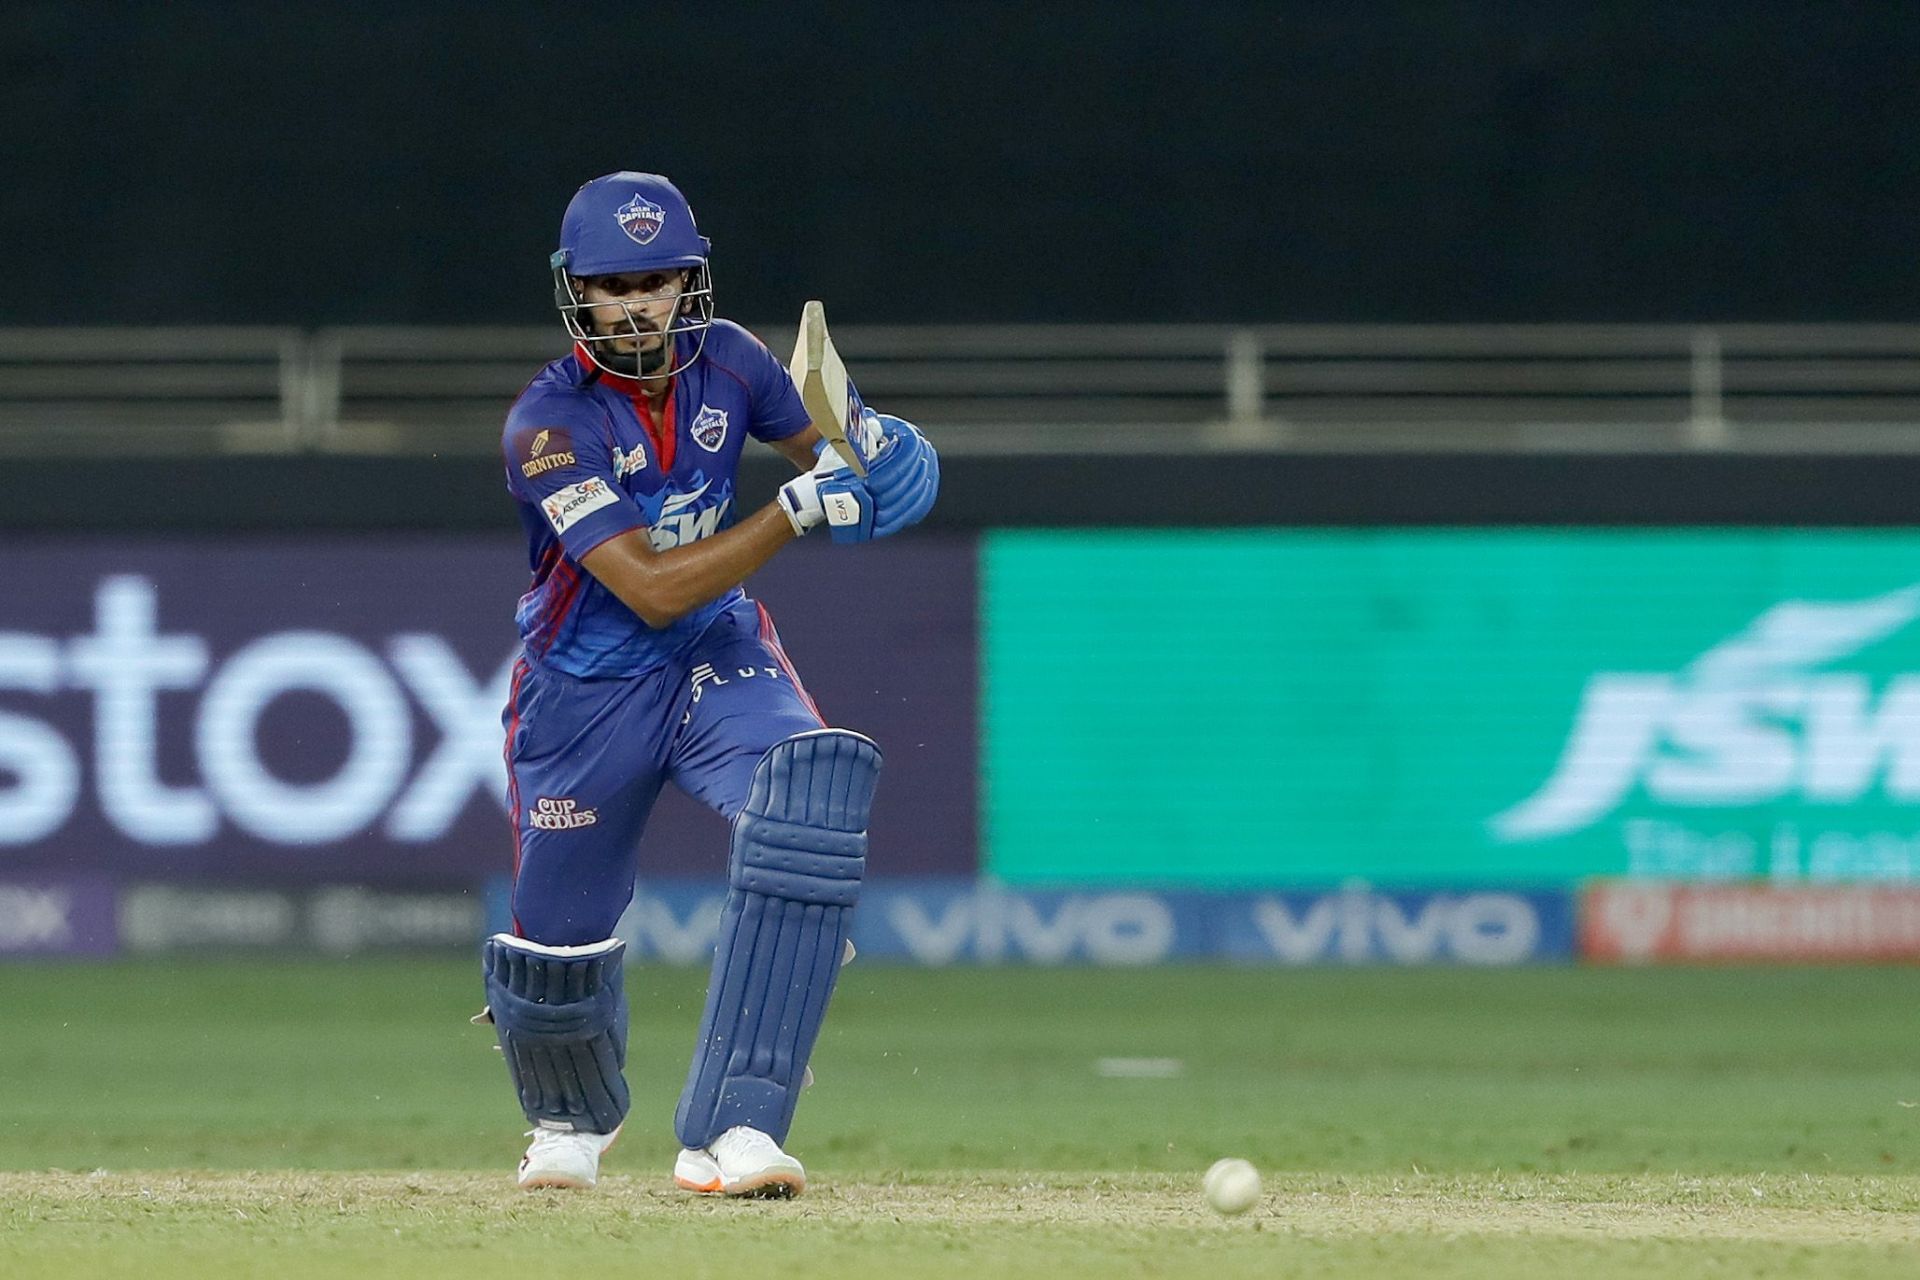 Shreyas Iyer could be the ideal captaincy candidate for the Kolkata Knight Riders (KKR) (Picture Credits: Saikat Das/Sportzpics/IPL).